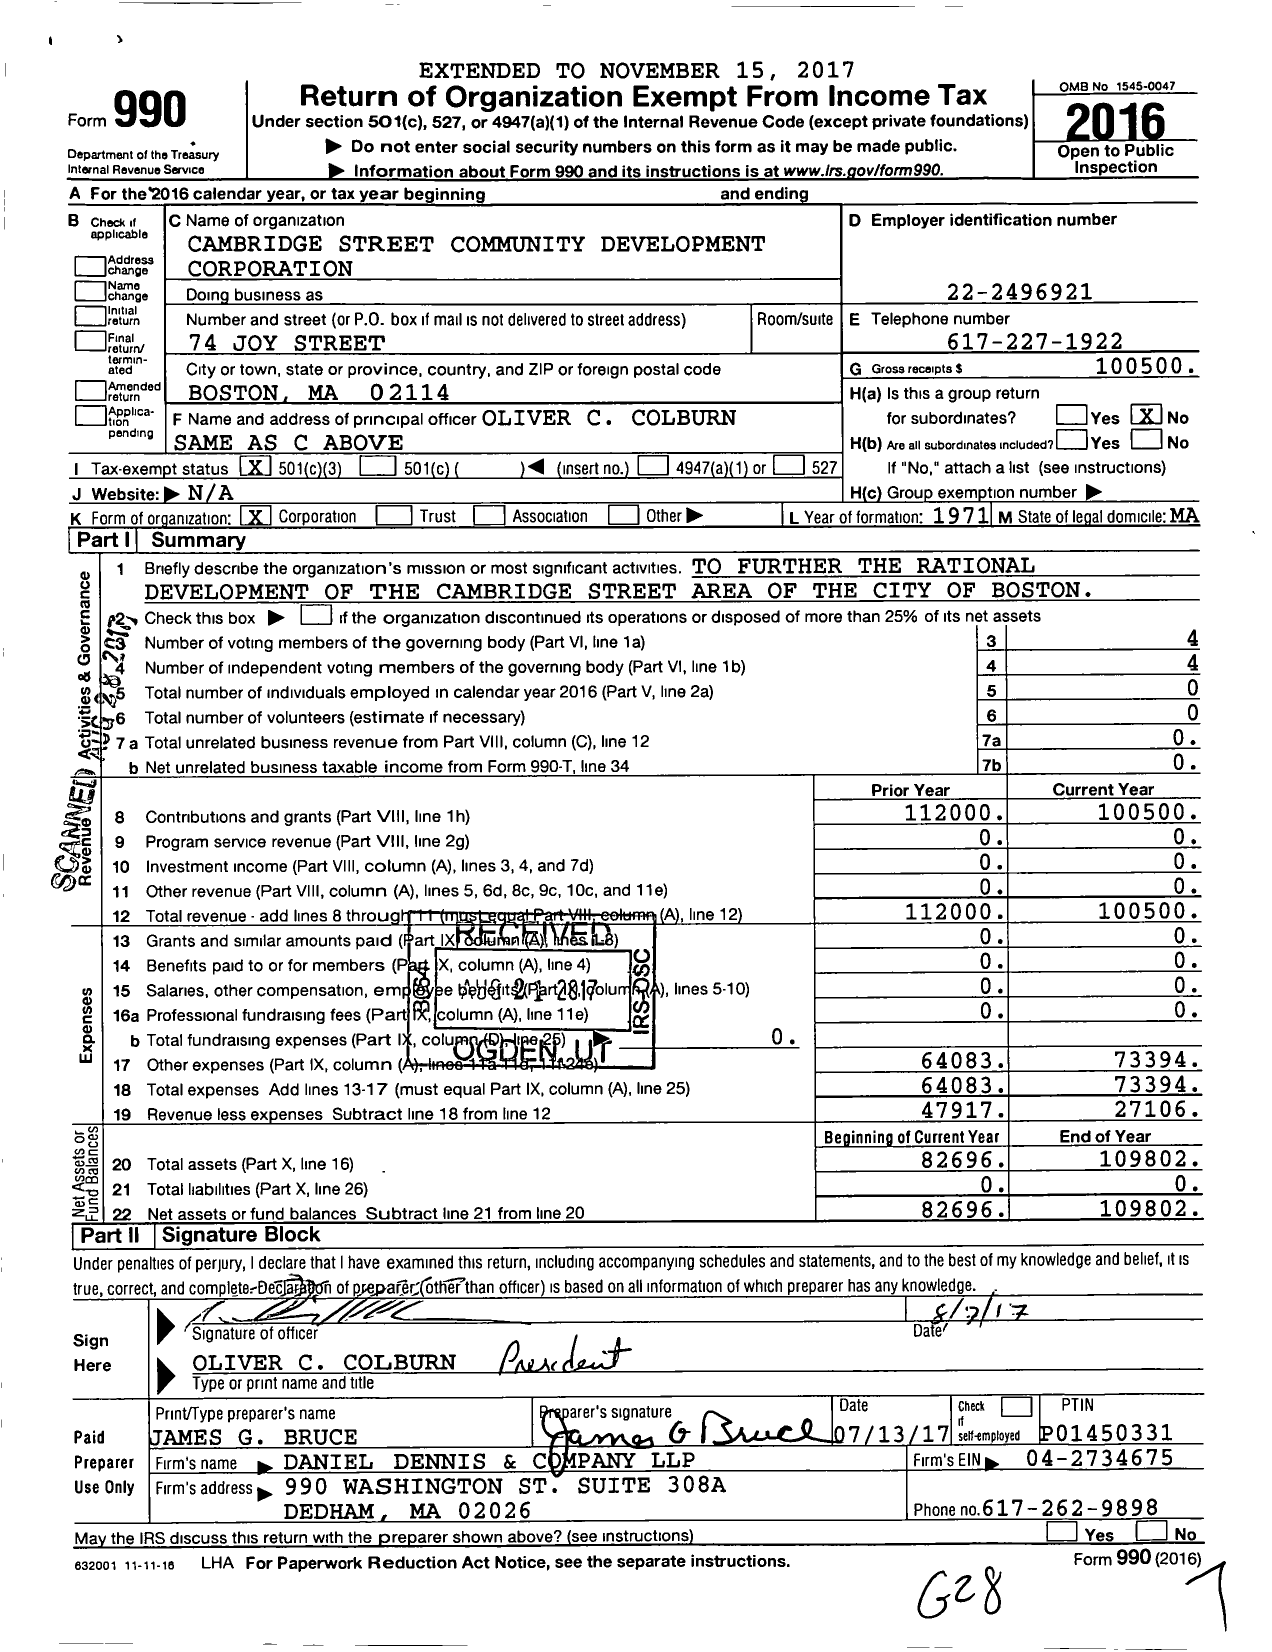 Image of first page of 2016 Form 990 for Cambridge Street Community Development Corporation